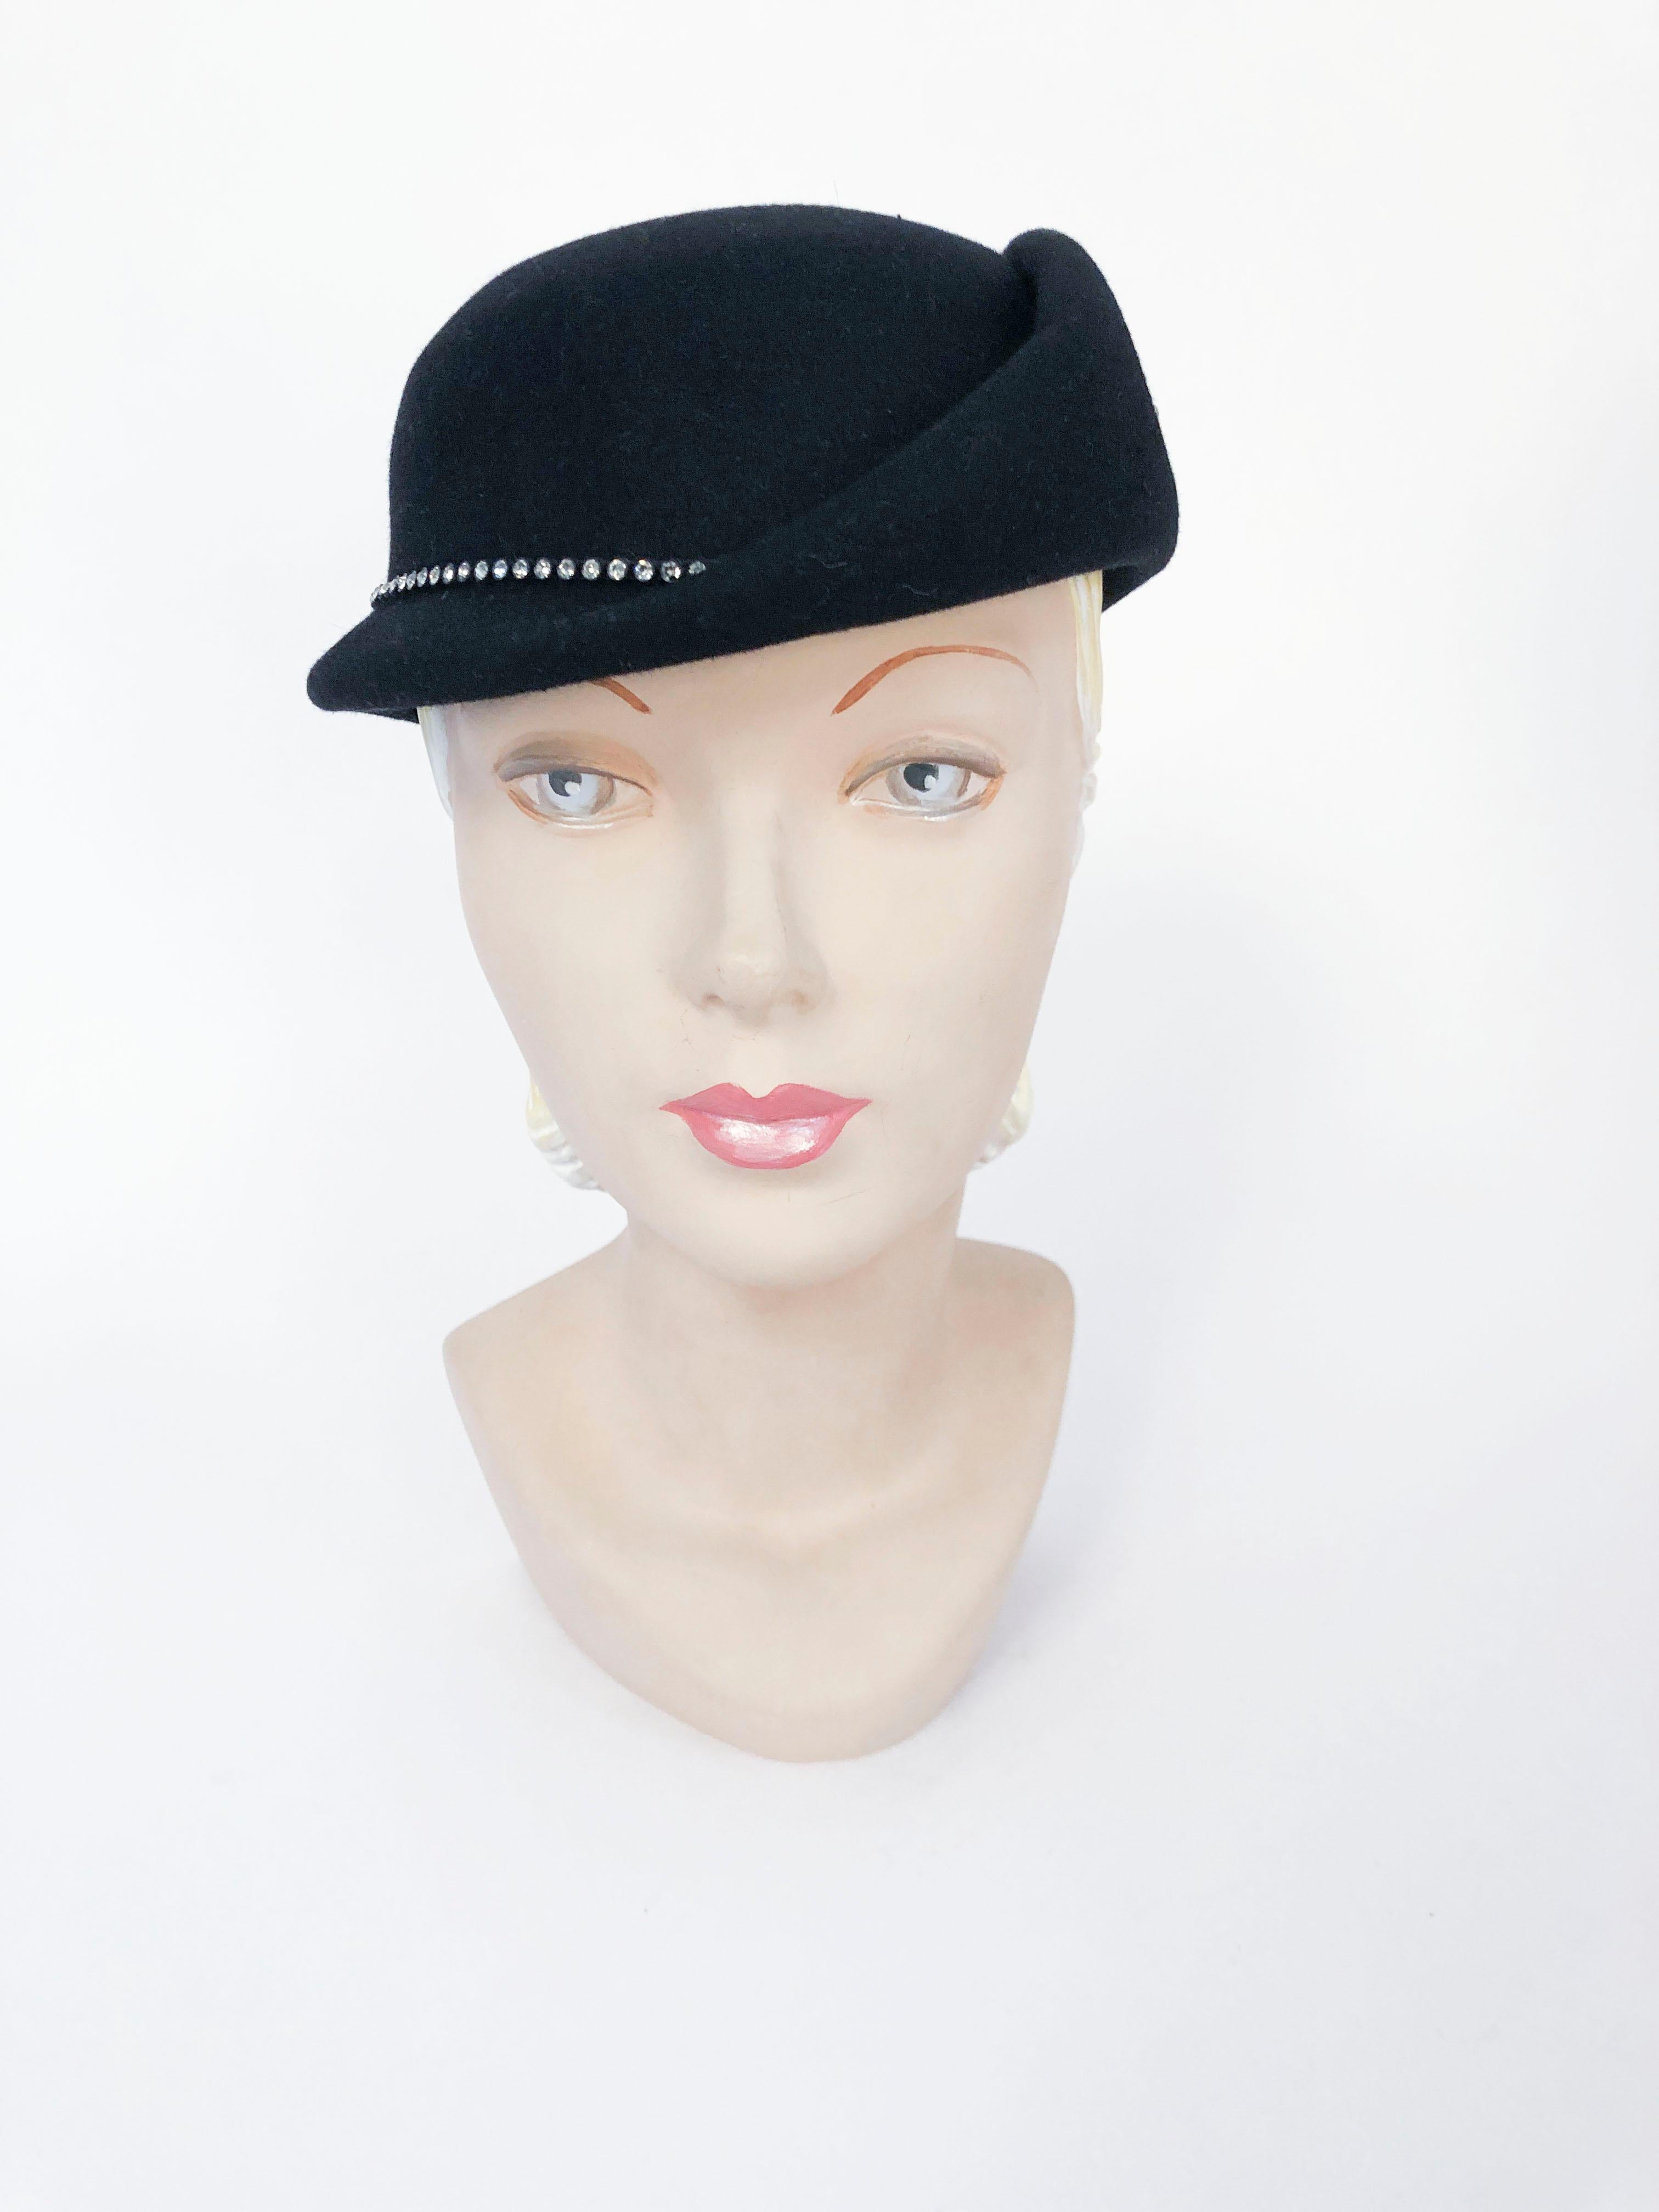 1960s/1970s Black Fur Felt Hat with Rhinestone Accents on the head band and the matching hat pin. This hat mimics the 1930's hat silhouette with its asymetrical shape and brim